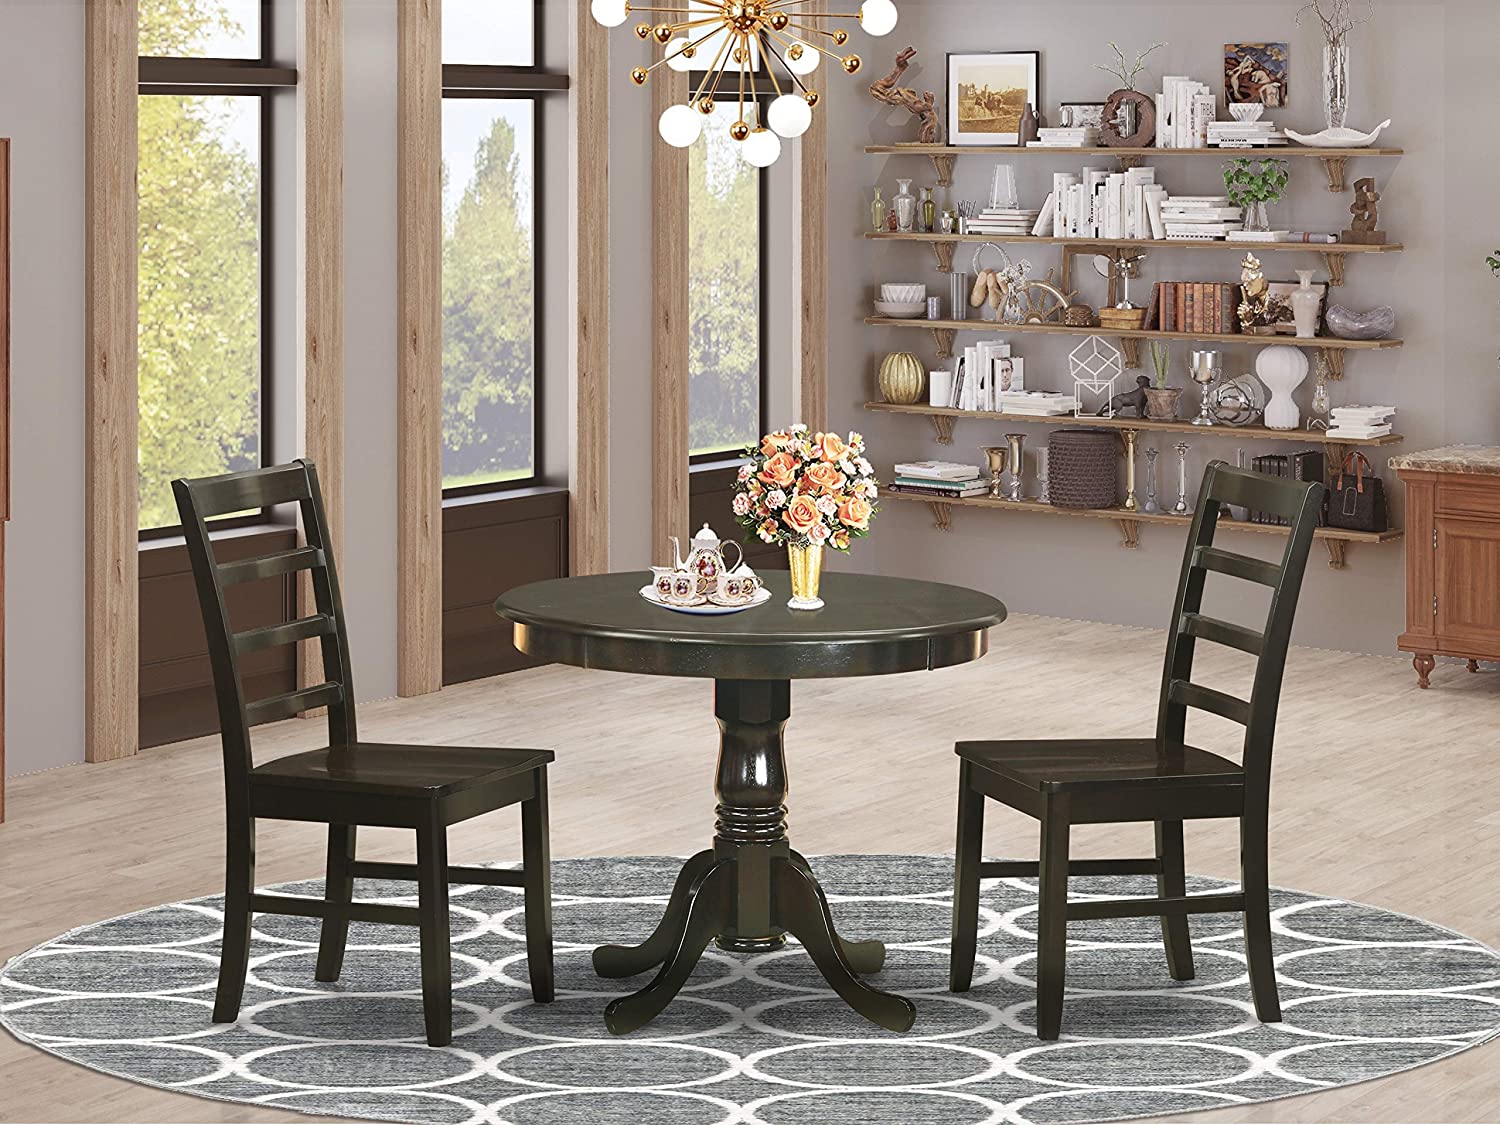 East West Furniture Dinette Set- 2 Fantastic Chairs for Dining Room - A Wonderful Round Wooden Dining Table- Wooden Seat and Cappuccino Pedestal Dining Table